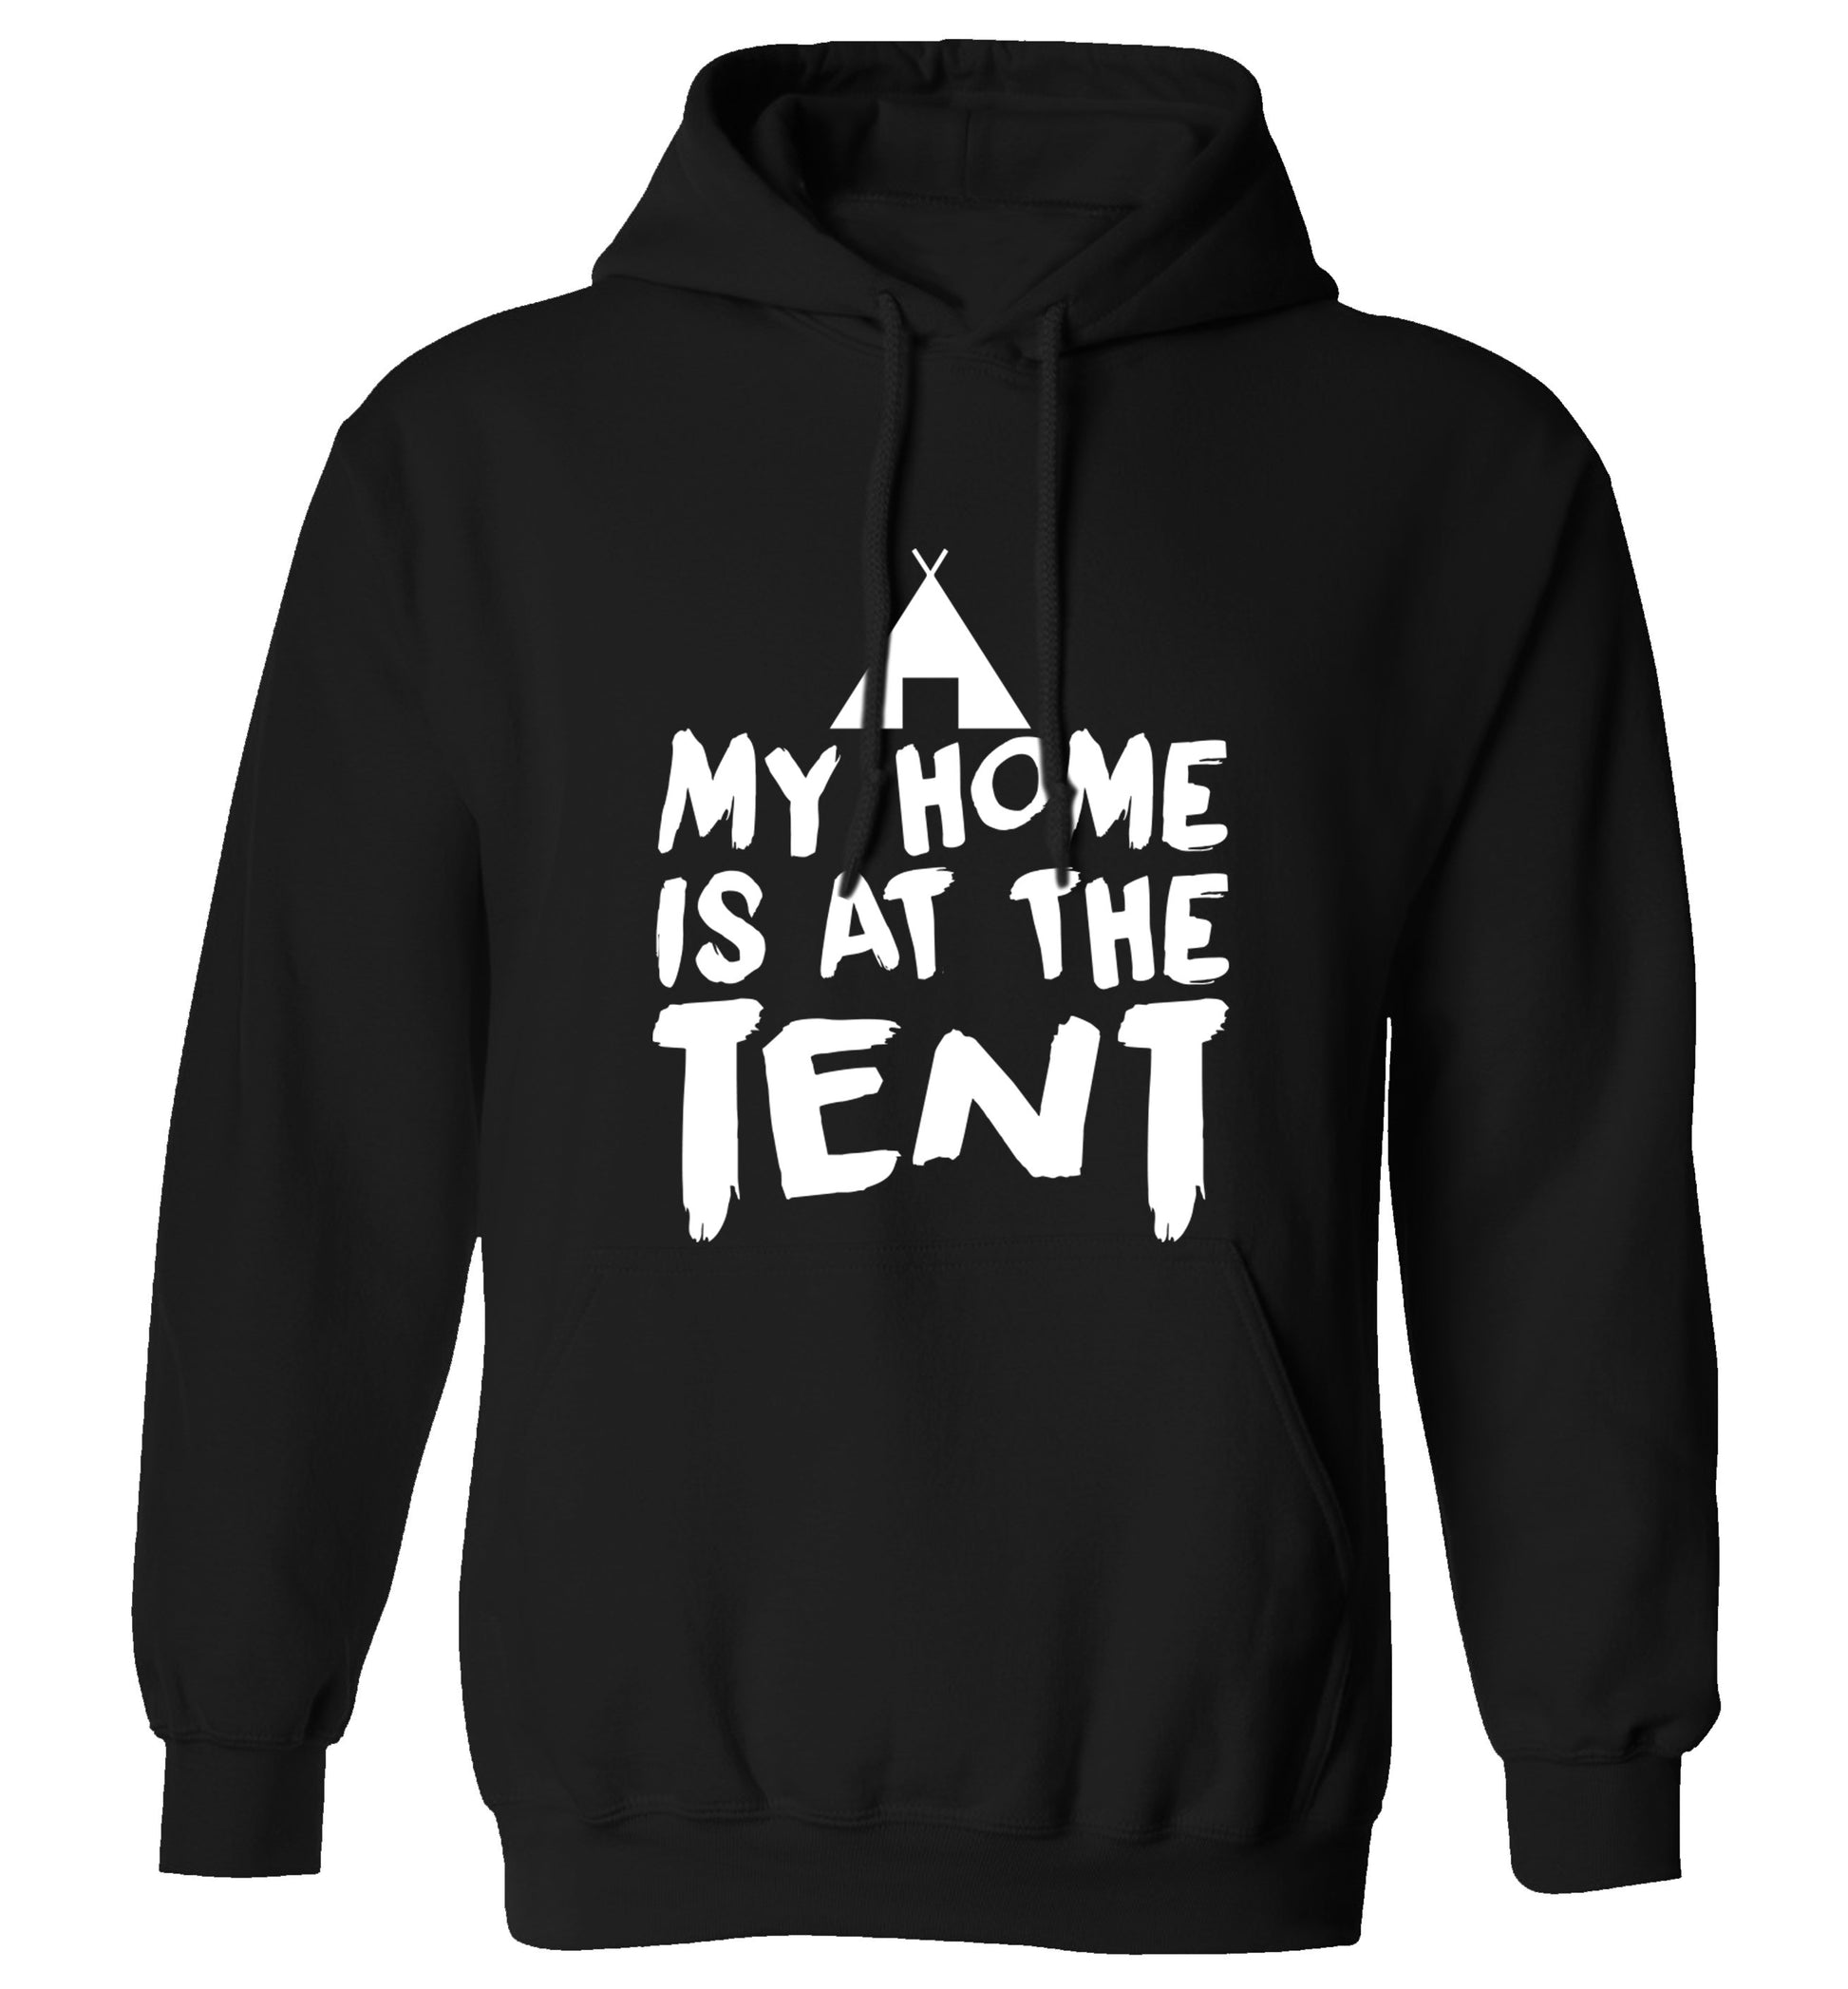 My home is at the tent adults unisex black hoodie 2XL